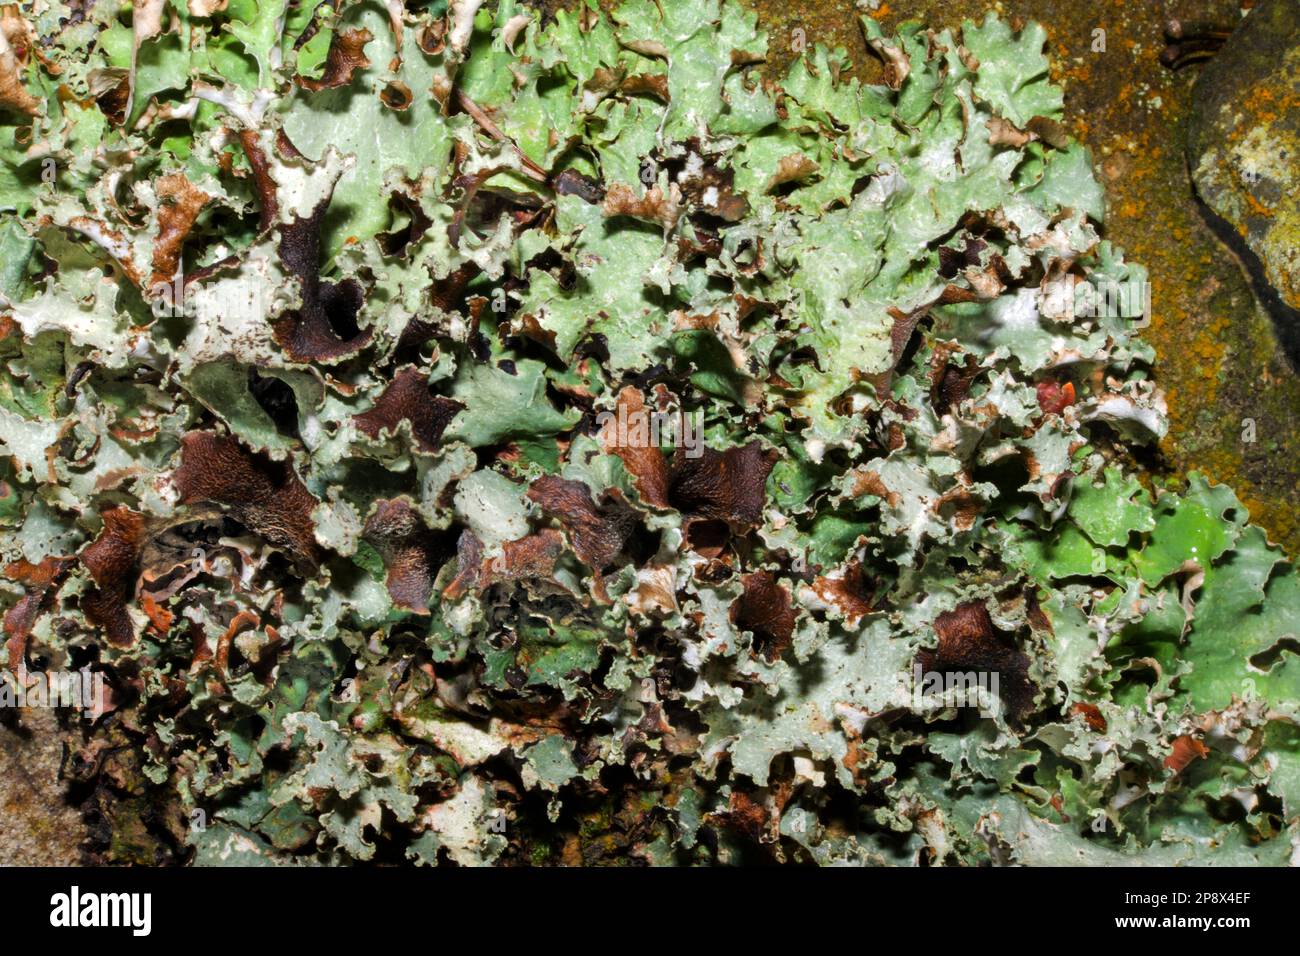 Platismatia glauca is a common and widespread foliose lichen found on tree bark but also on upland rocks. It is a cosmopolitan species. Stock Photo